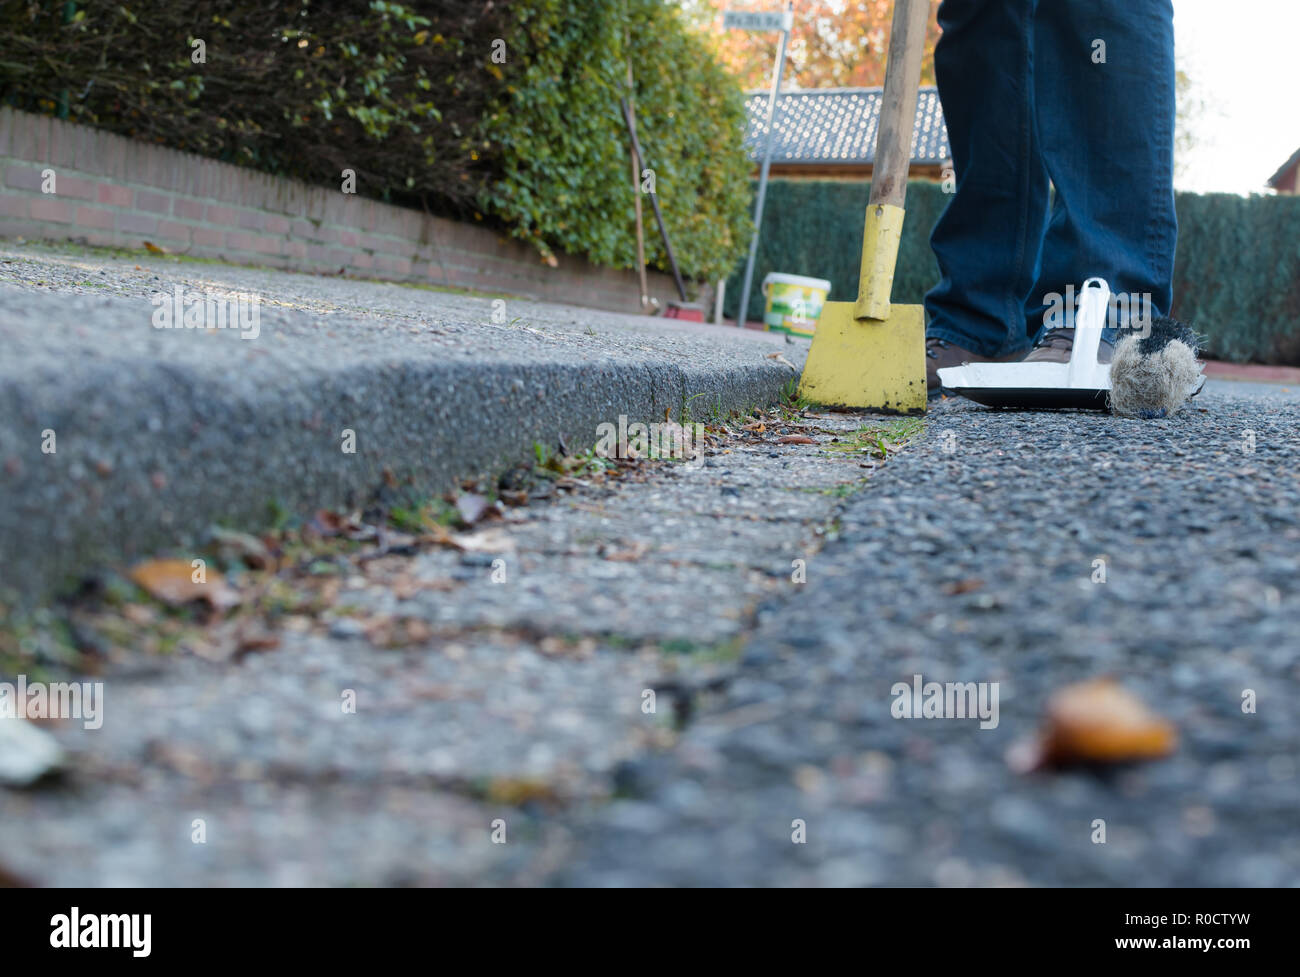 Man is cleaning the street gutter Stock Photo